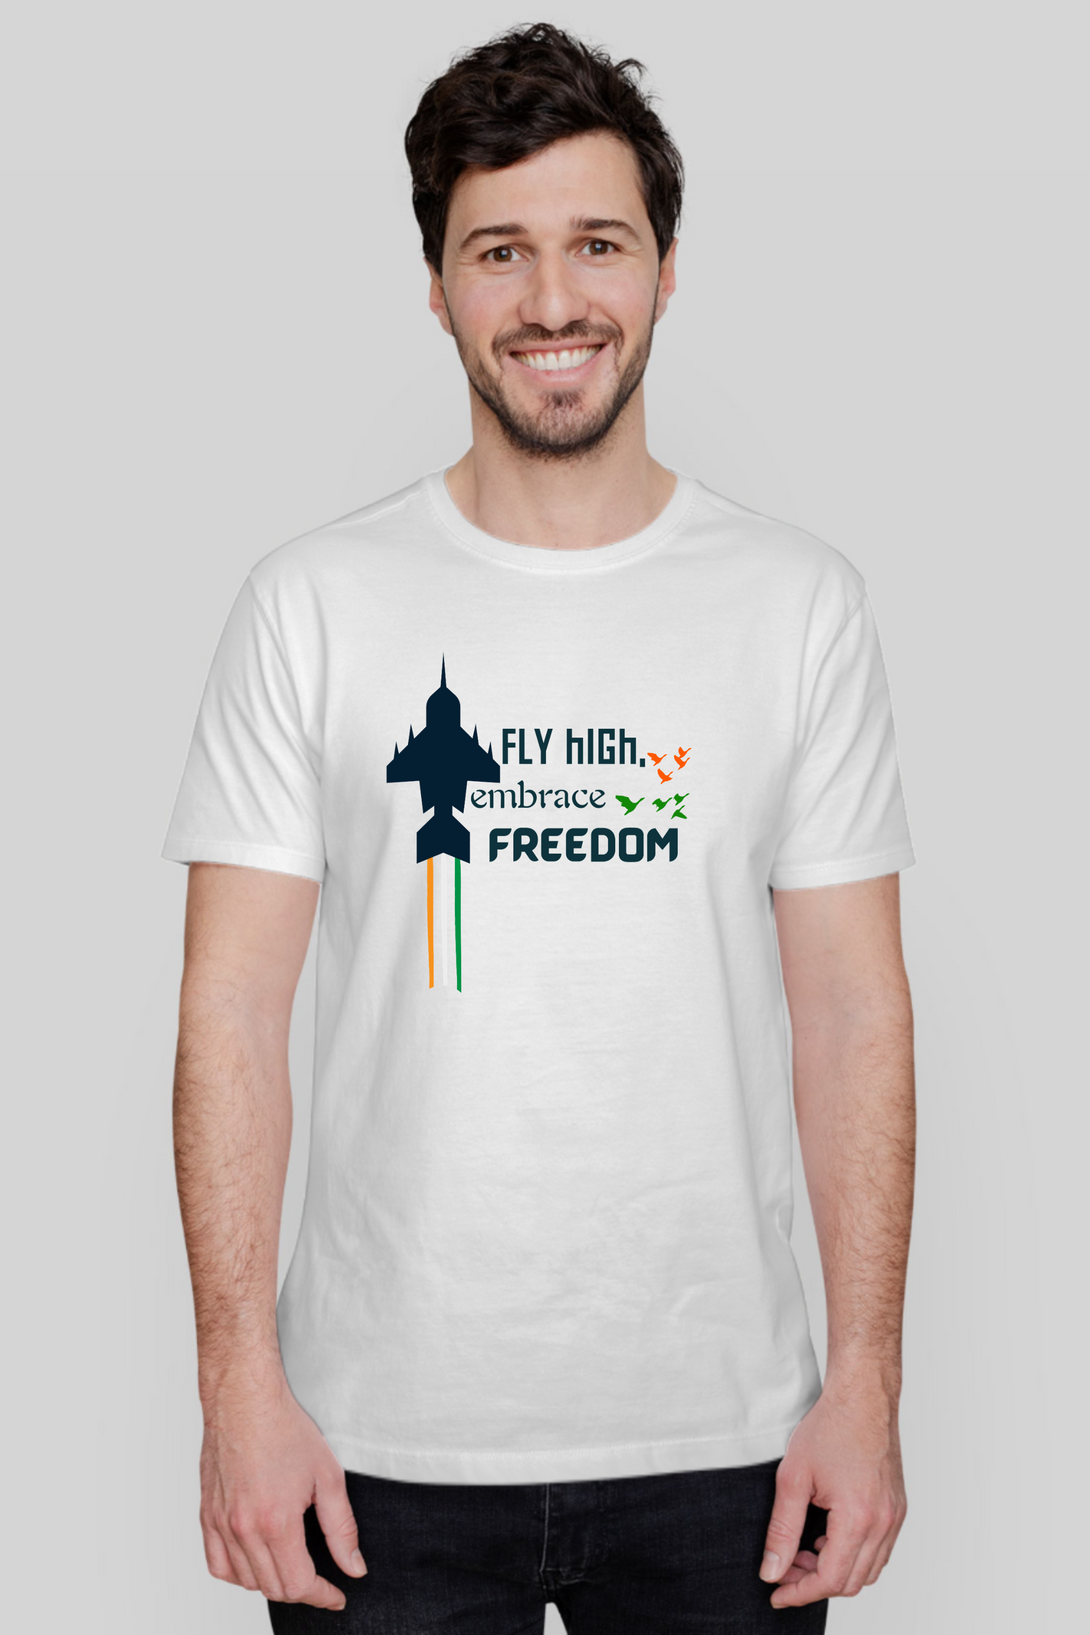 Fly High Embrace Freedom White Printed T-Shirt For Men - WowWaves - 6